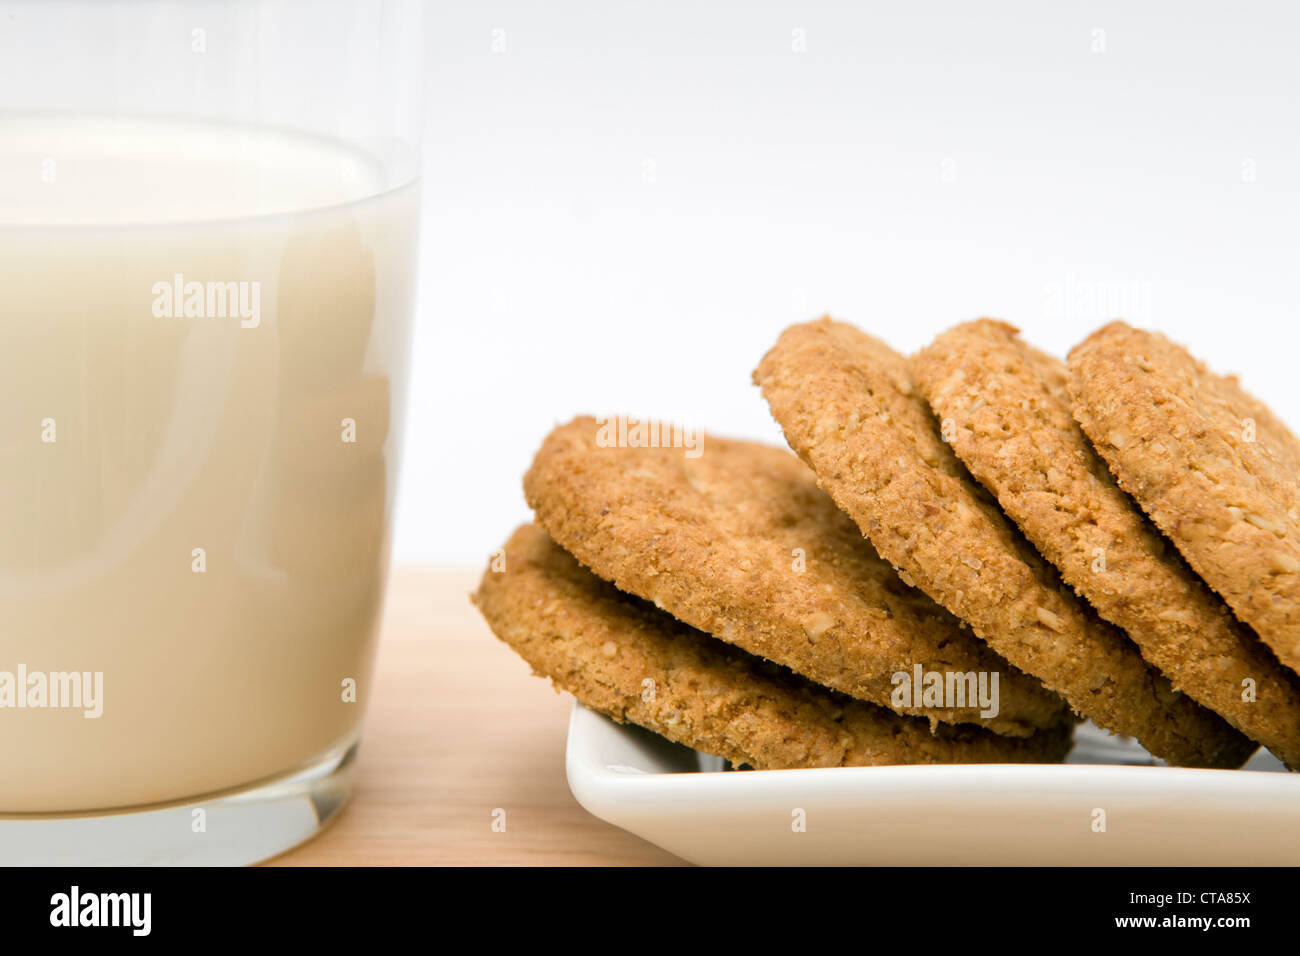 Glass of milk with plate of biscuits on white background Stock Photo